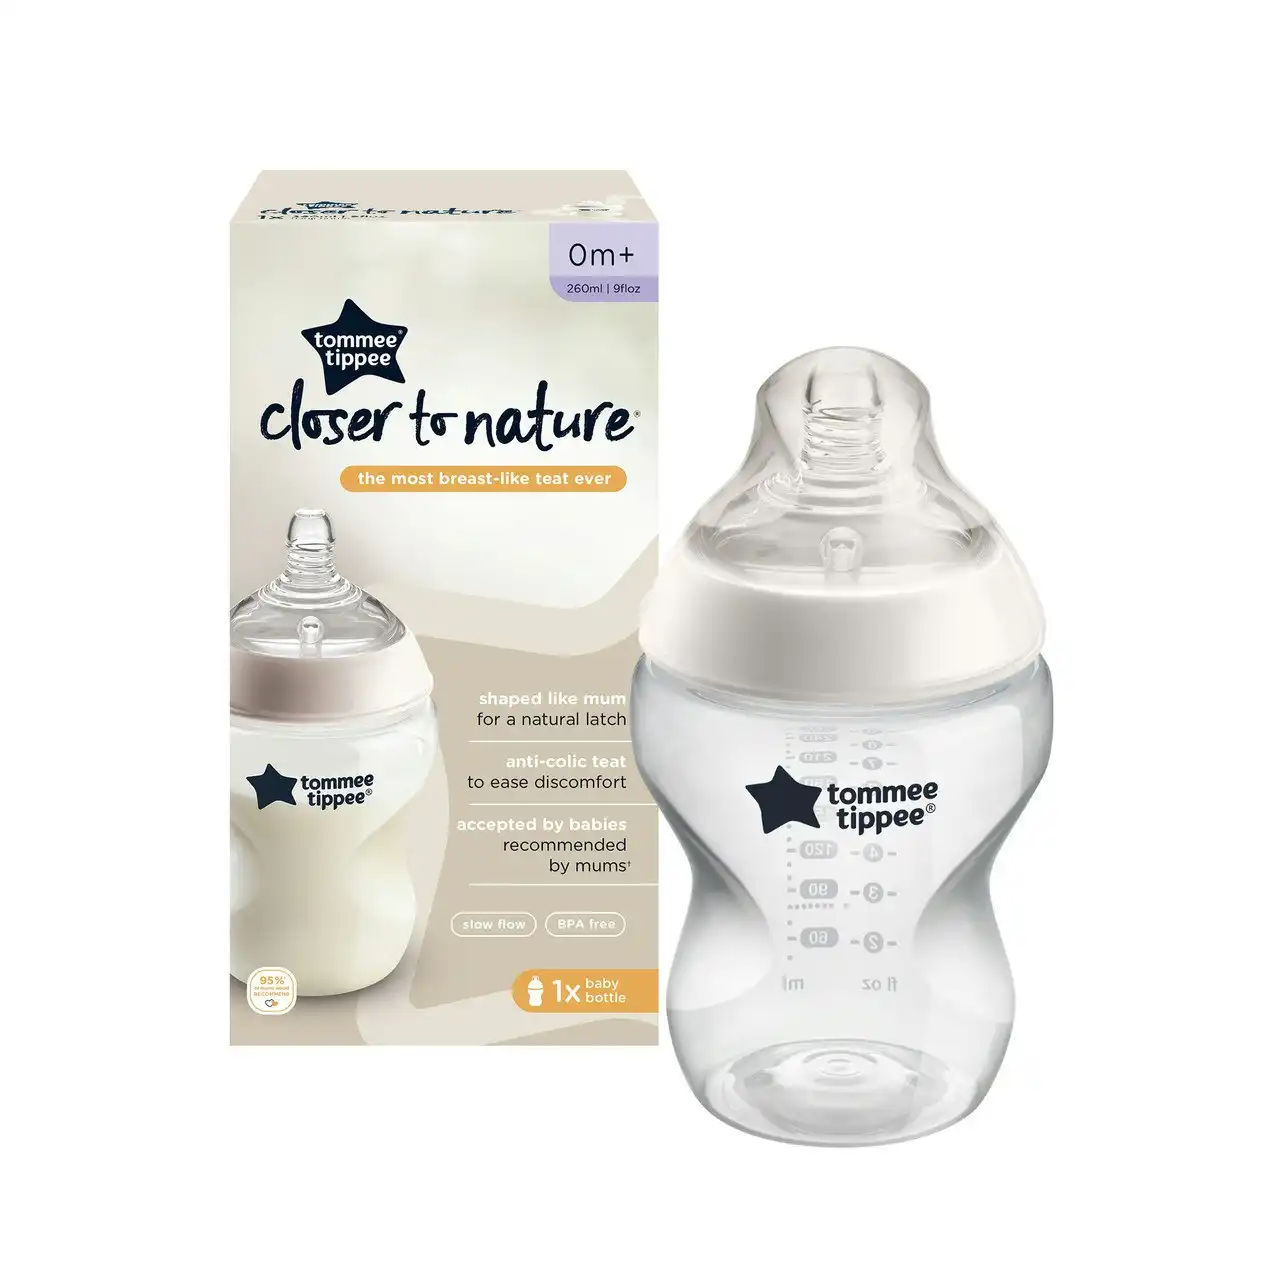 Tommee Tippee Closer to Nature Baby Bottle, 260ml, Slow Flow Breast-Like Teat for a Natural Latch Anti-Colic Valve, Pack of 1